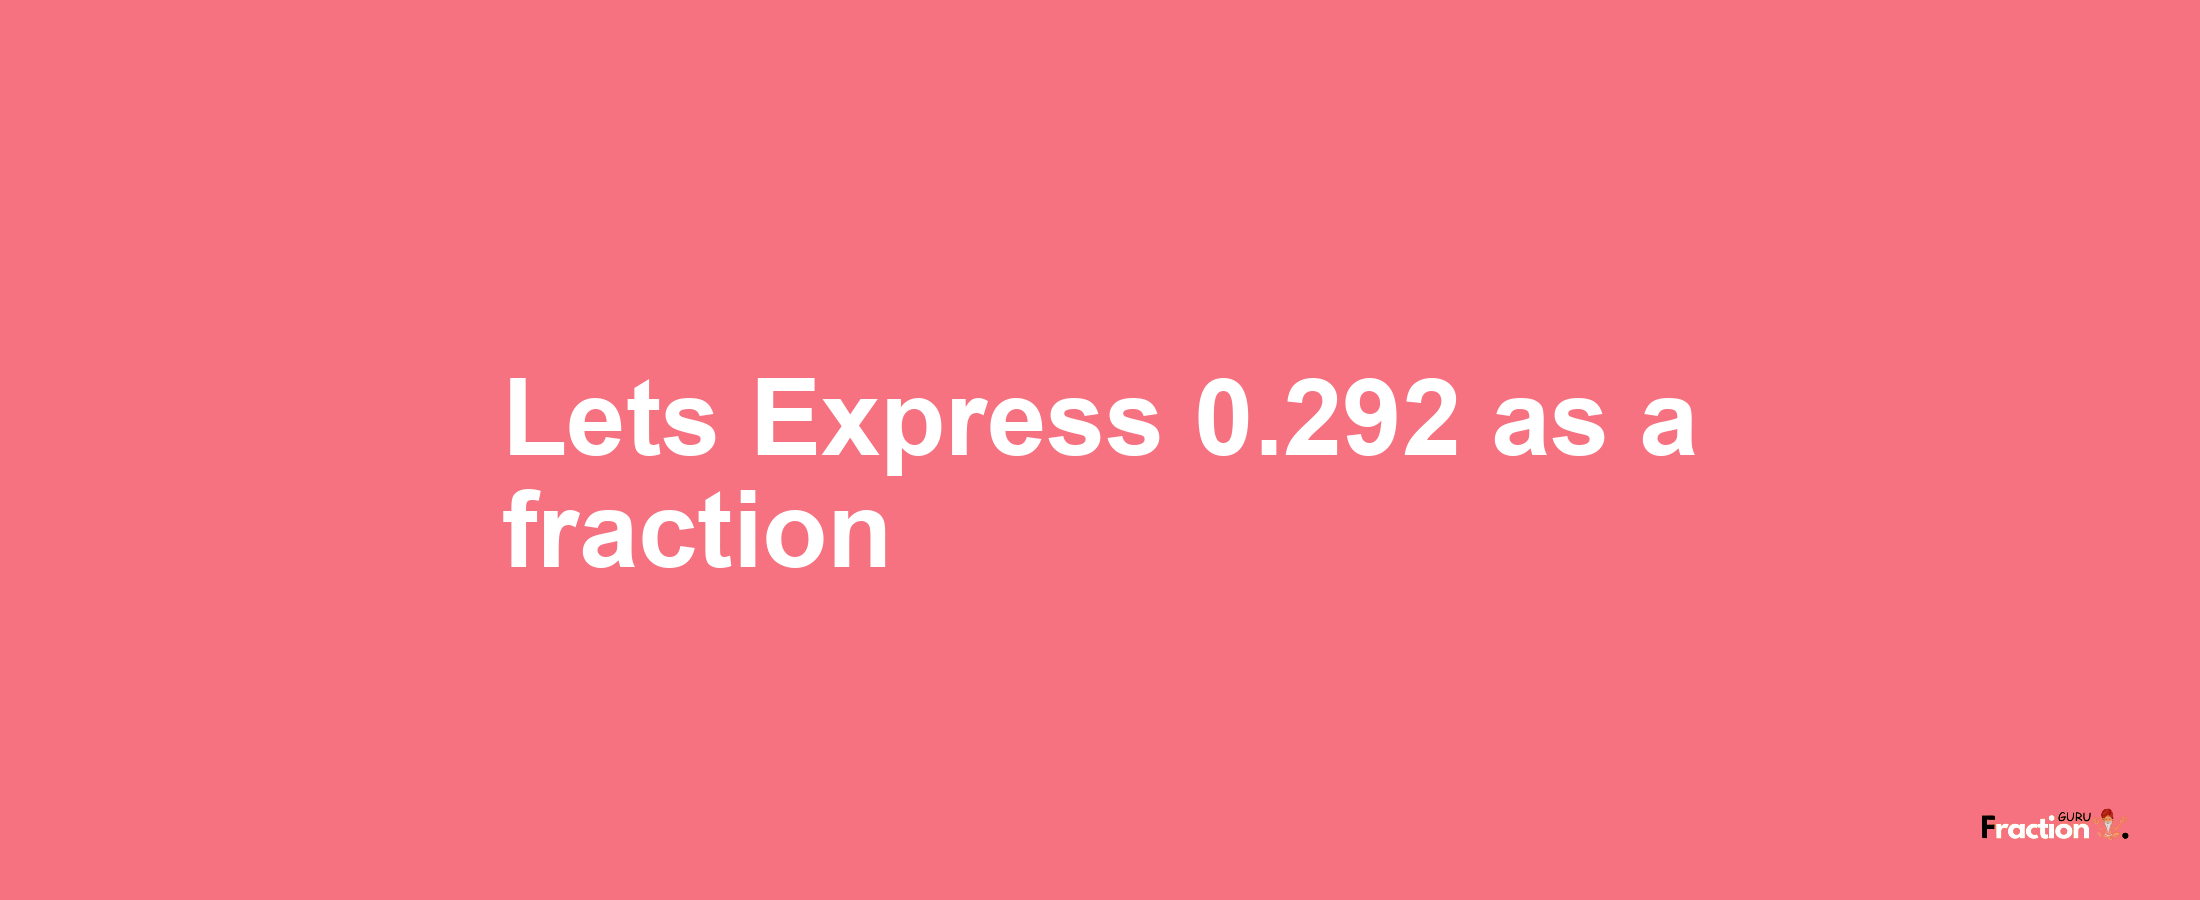 Lets Express 0.292 as afraction